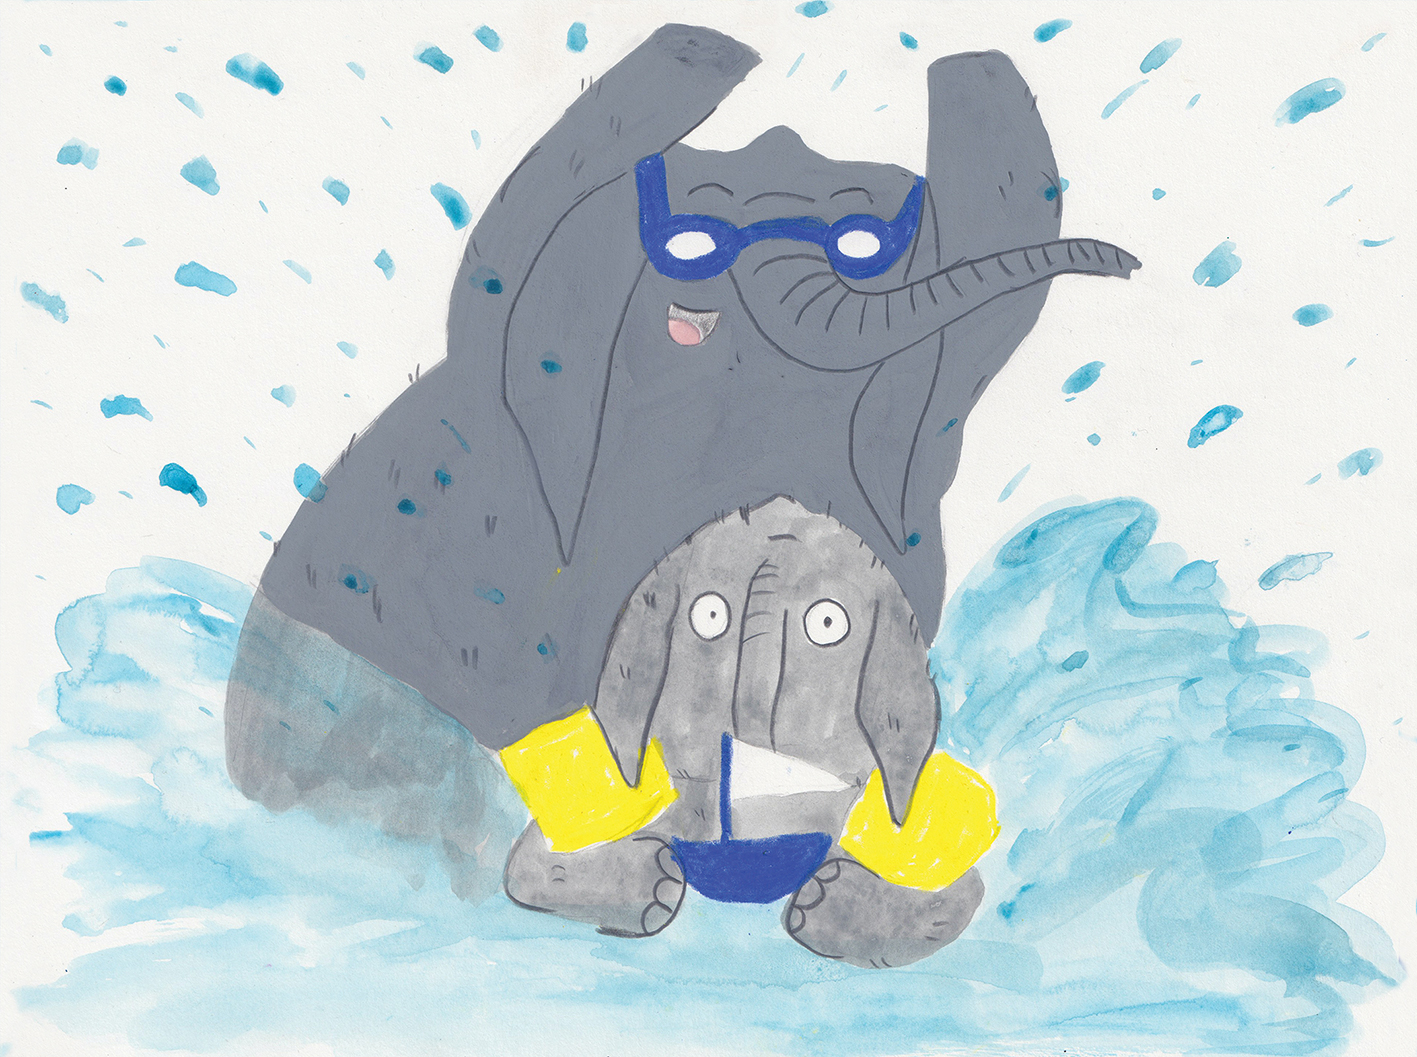 Artwork from “Being an Elephant is Great!”